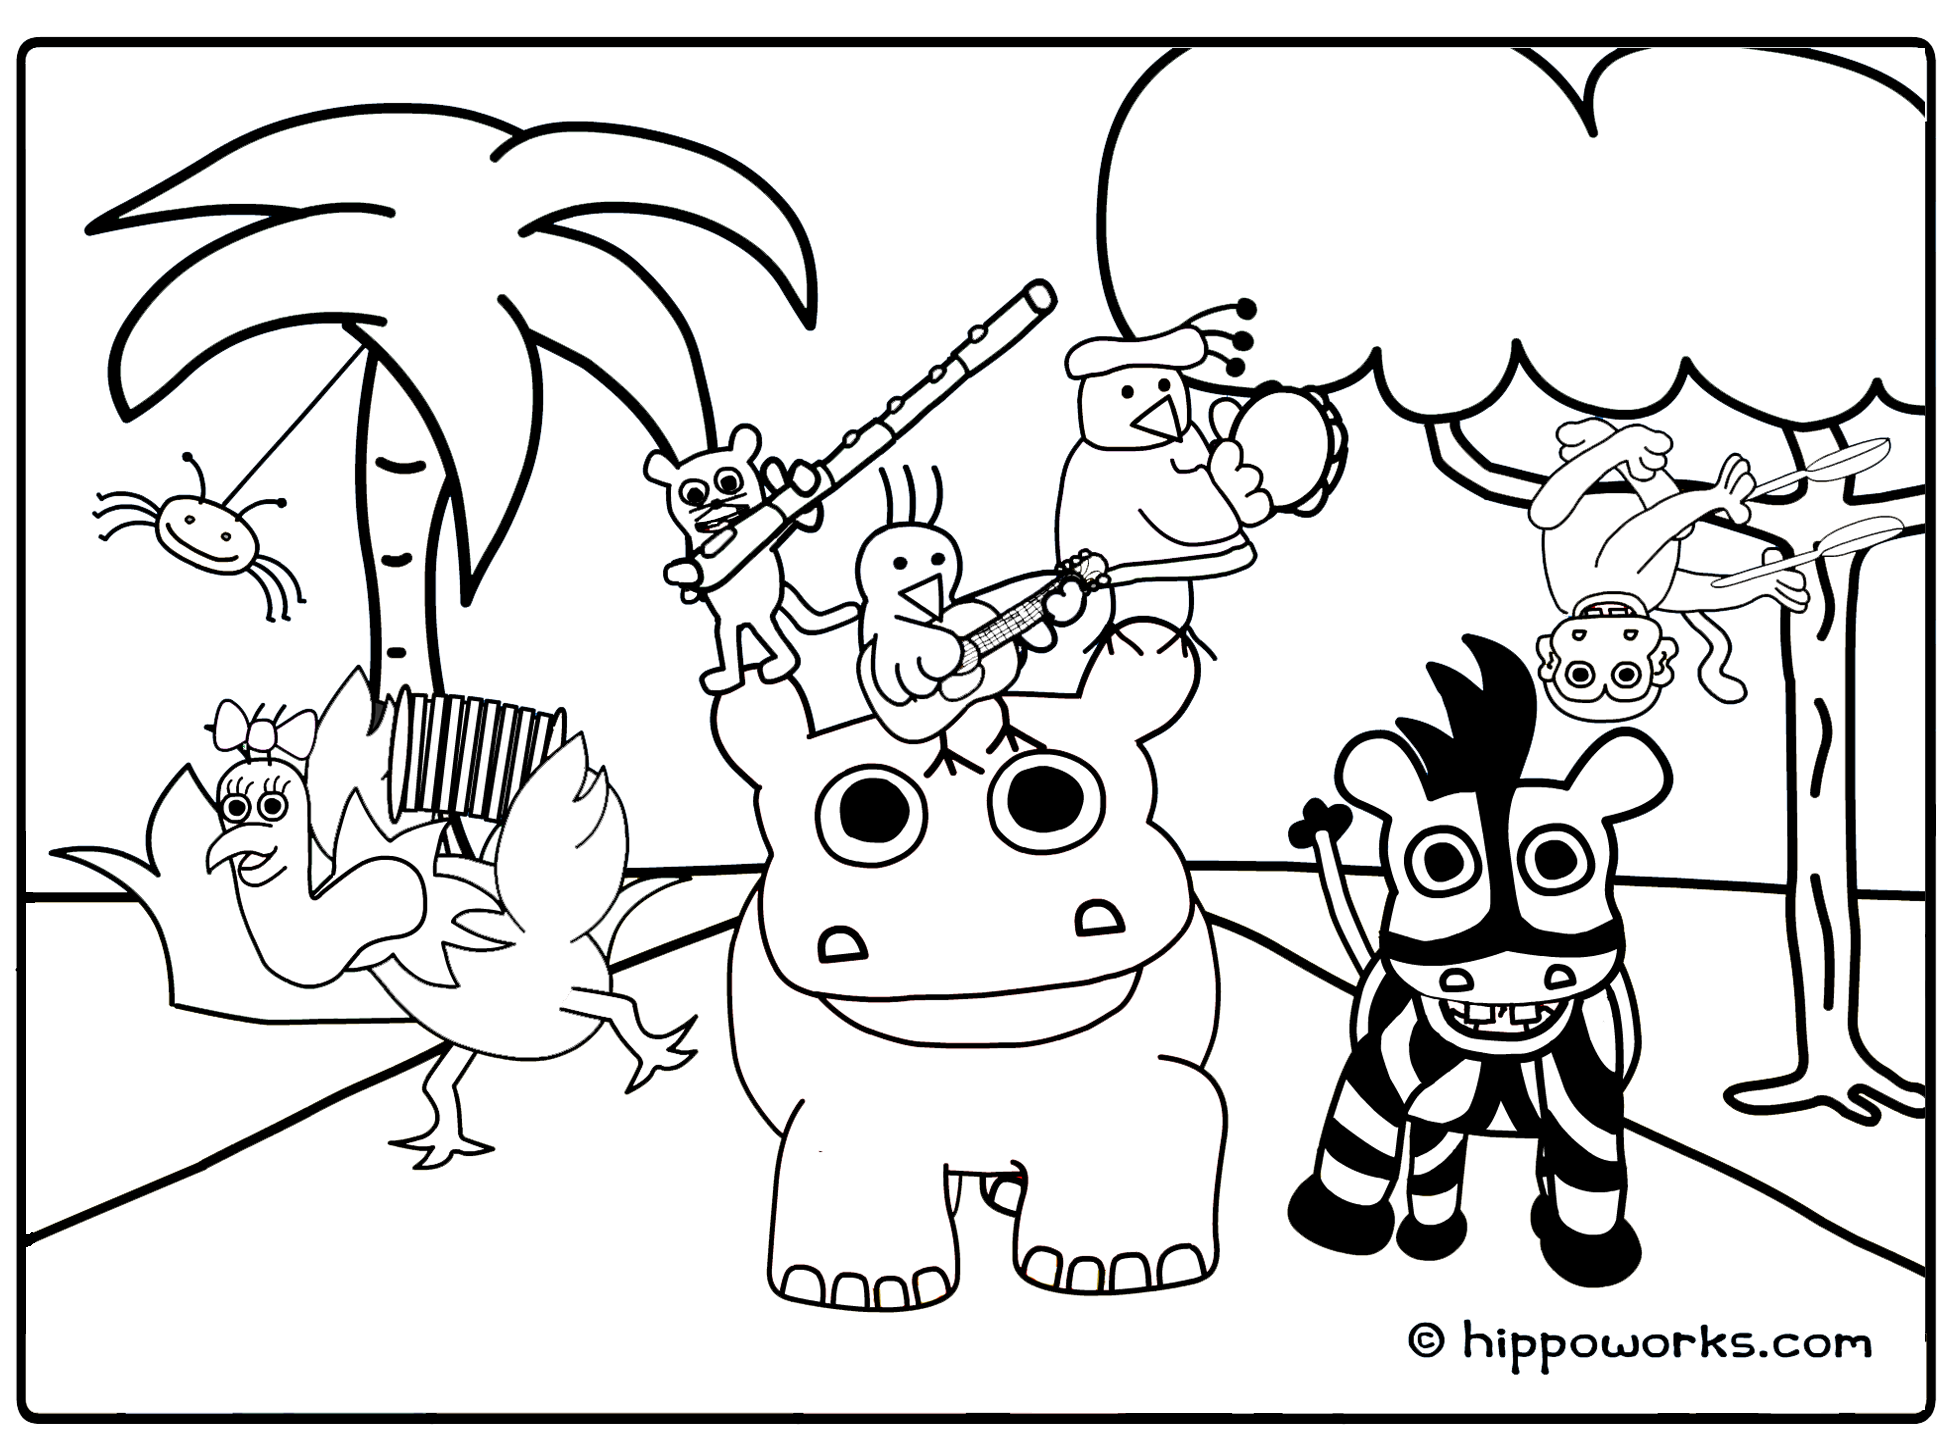 Jungle coloring pages to download and print for free